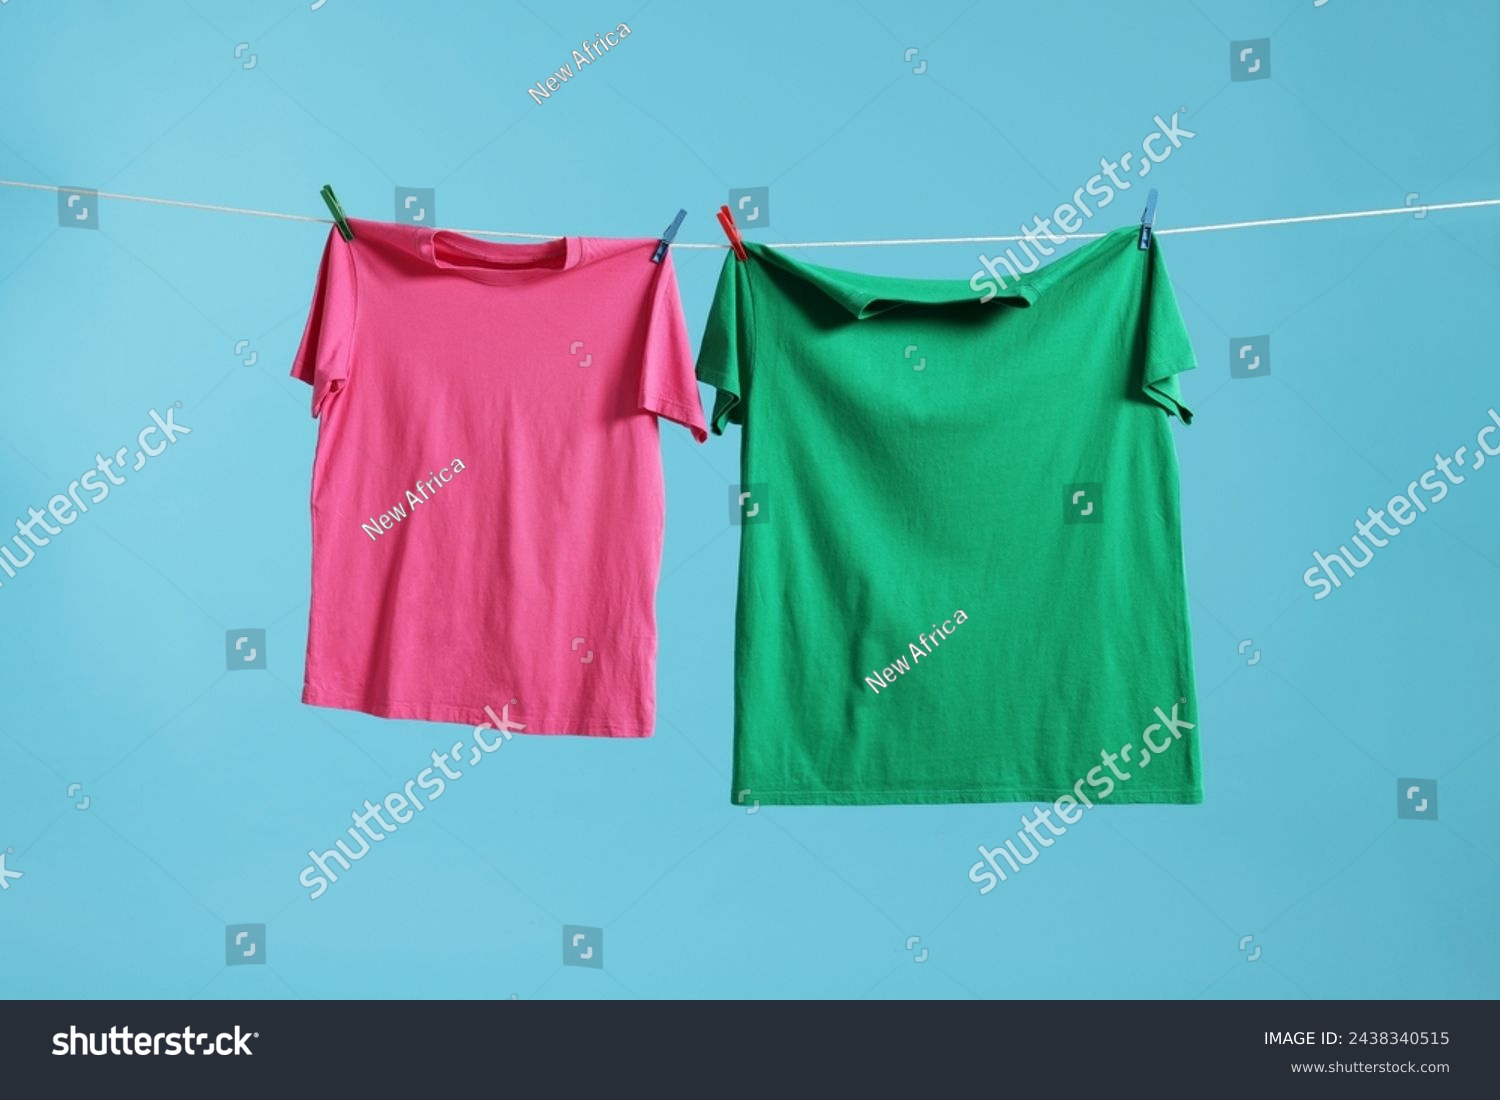 Two colorful t-shirts drying on washing line against light blue background #2438340515